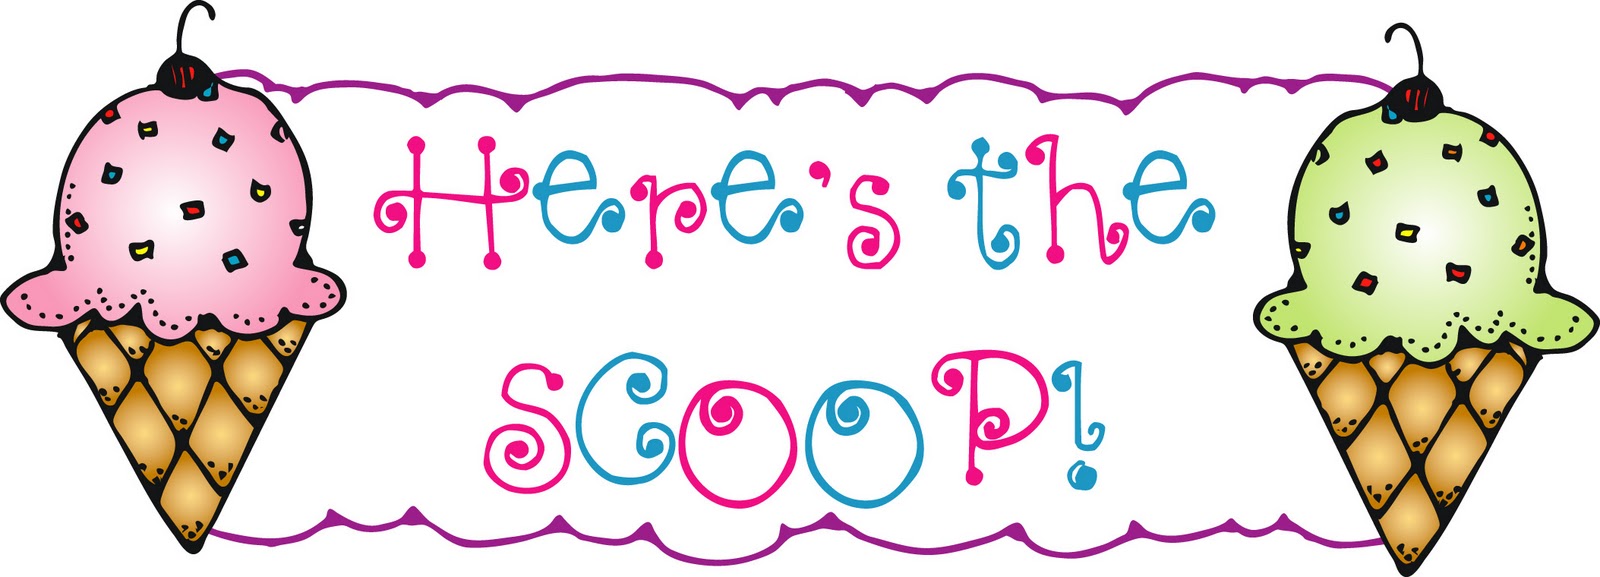 here-s-the-scoop-free-ice-cream-day-ecards-greeting-cards-123-greetings